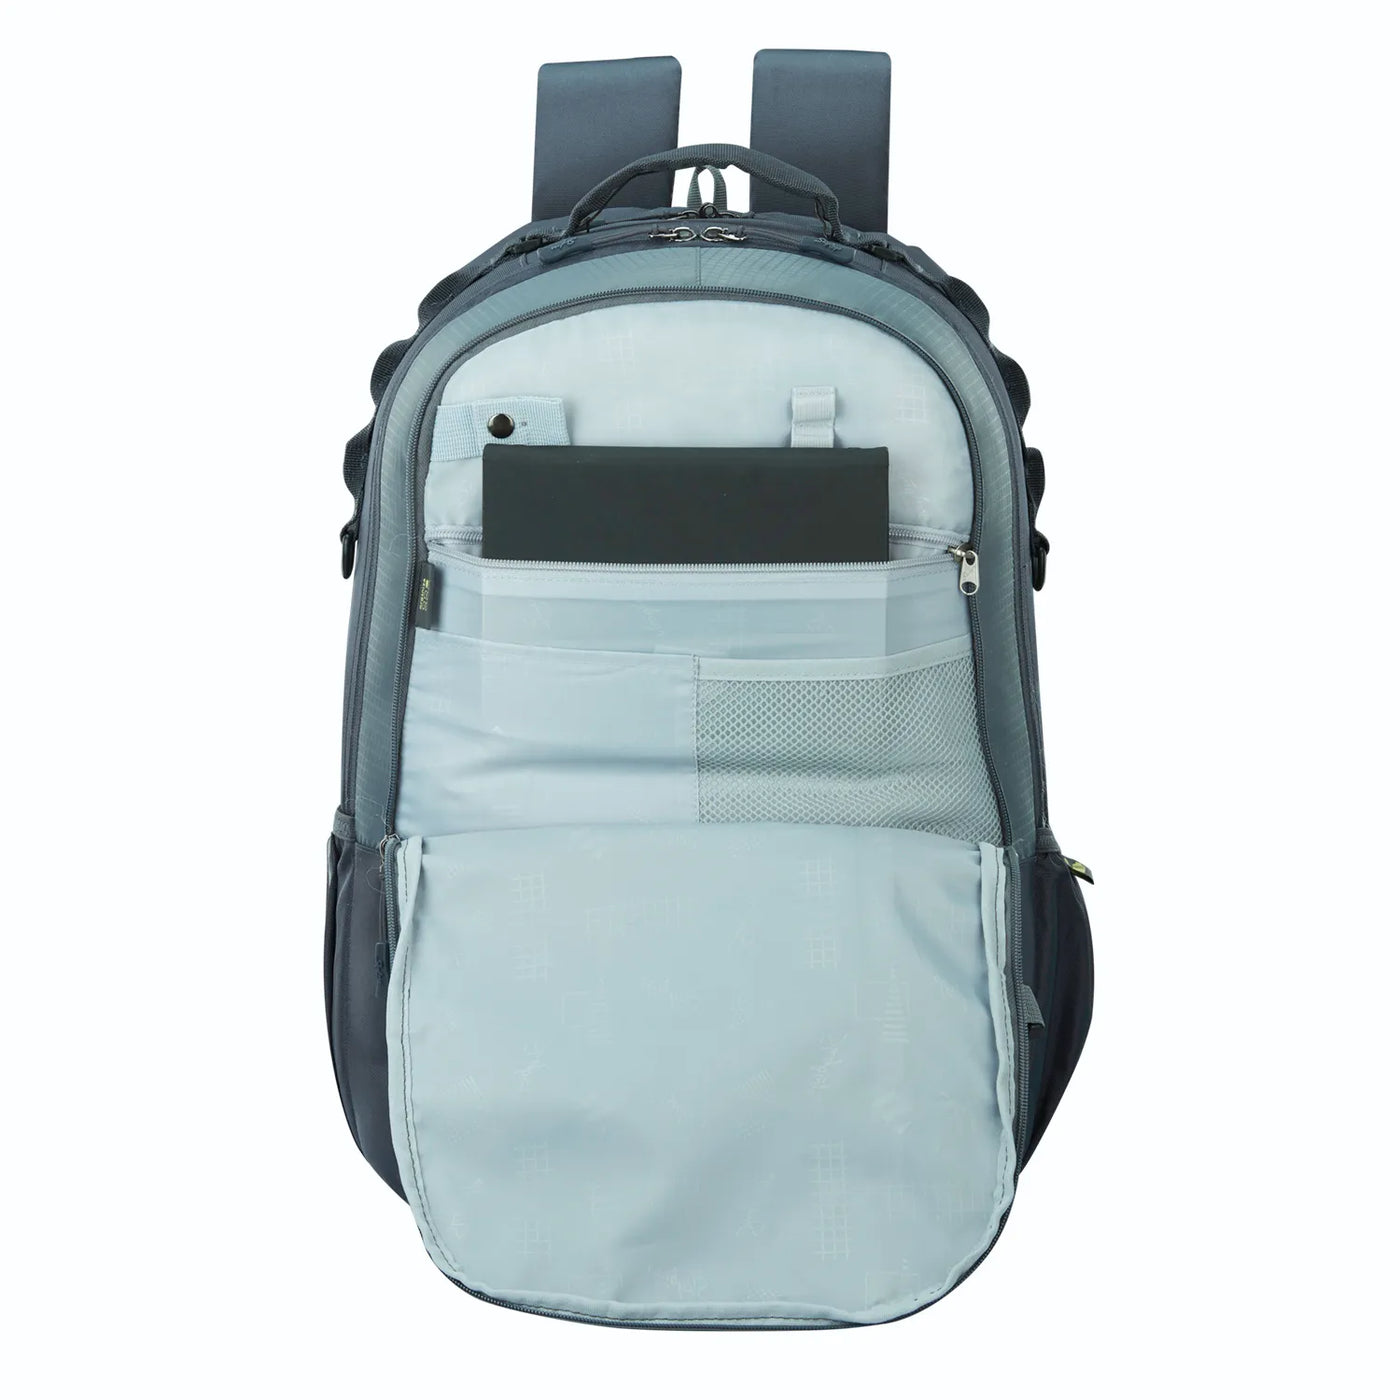 Skybags Campus Plus XL "01 Laptop Backpack Grey"